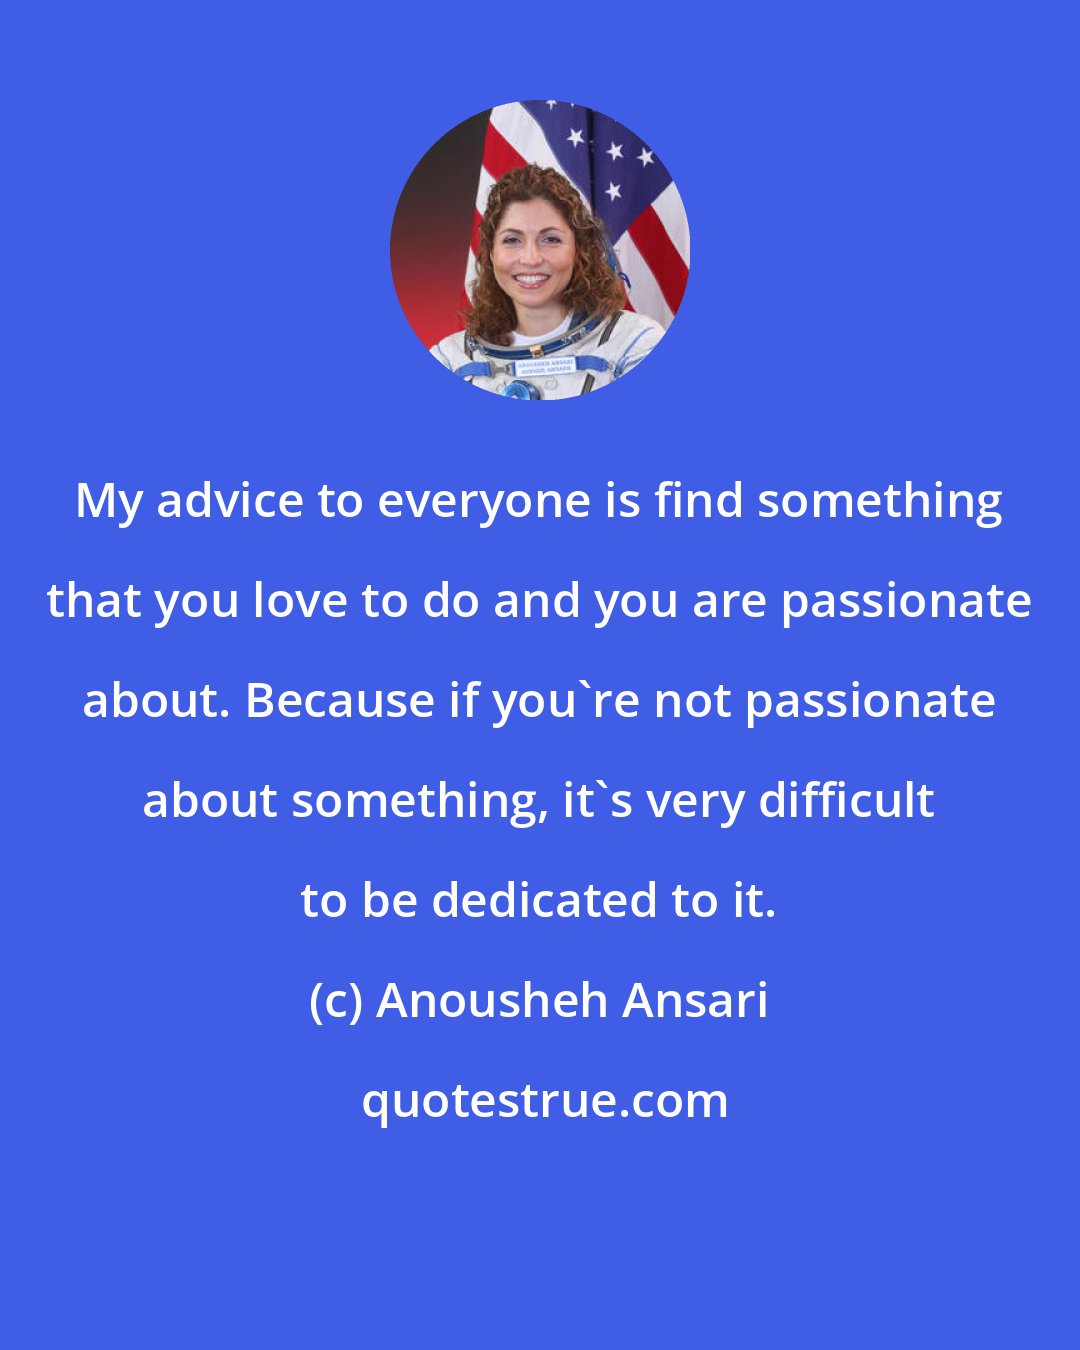 Anousheh Ansari: My advice to everyone is find something that you love to do and you are passionate about. Because if you're not passionate about something, it's very difficult to be dedicated to it.